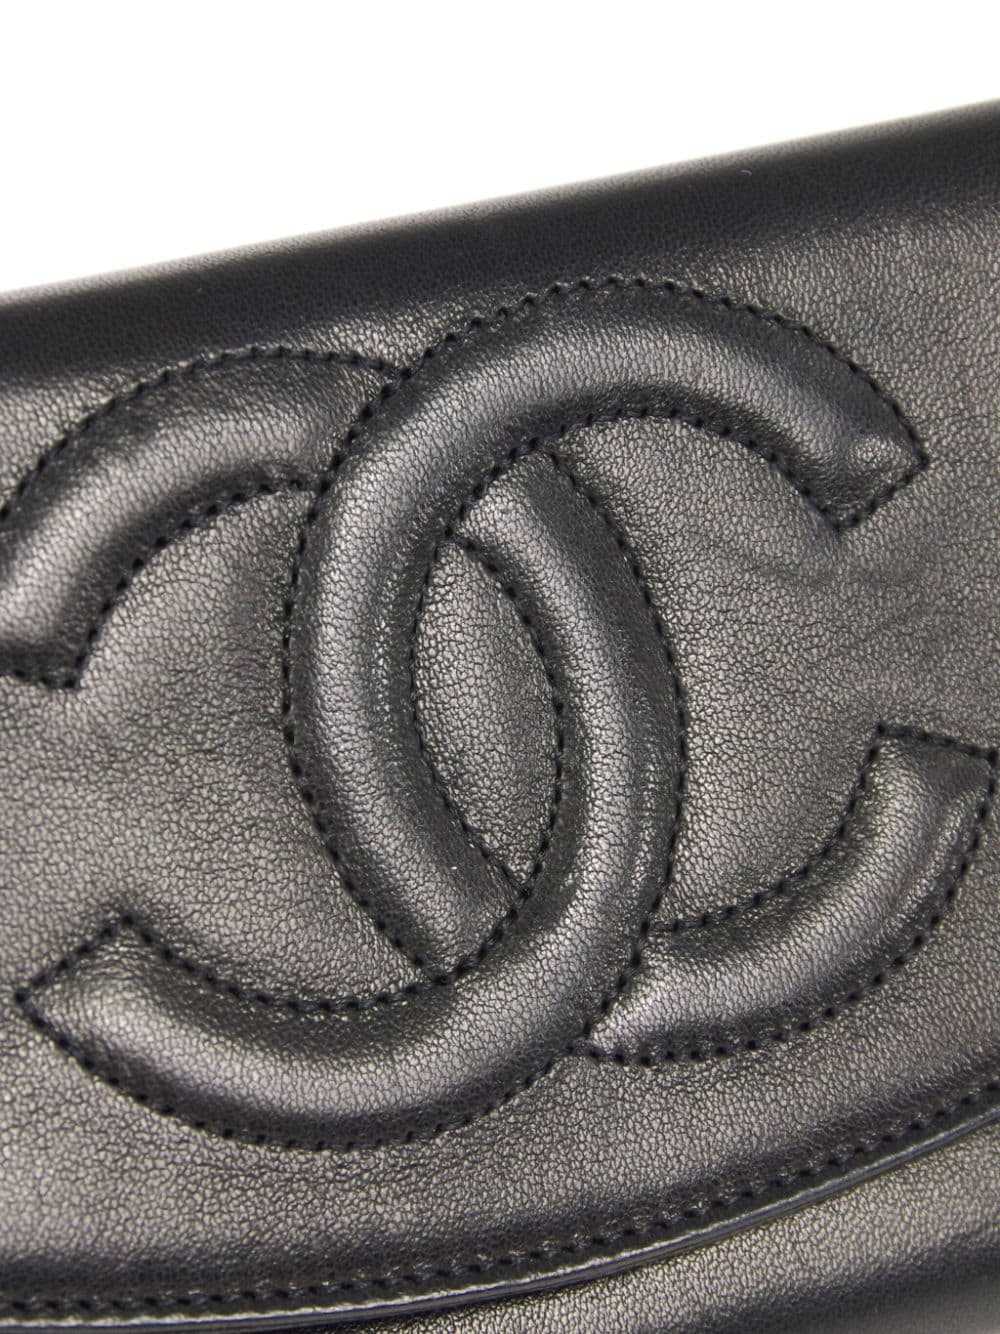 CHANEL Pre-Owned 1997 CC leather wallet - Black - image 5